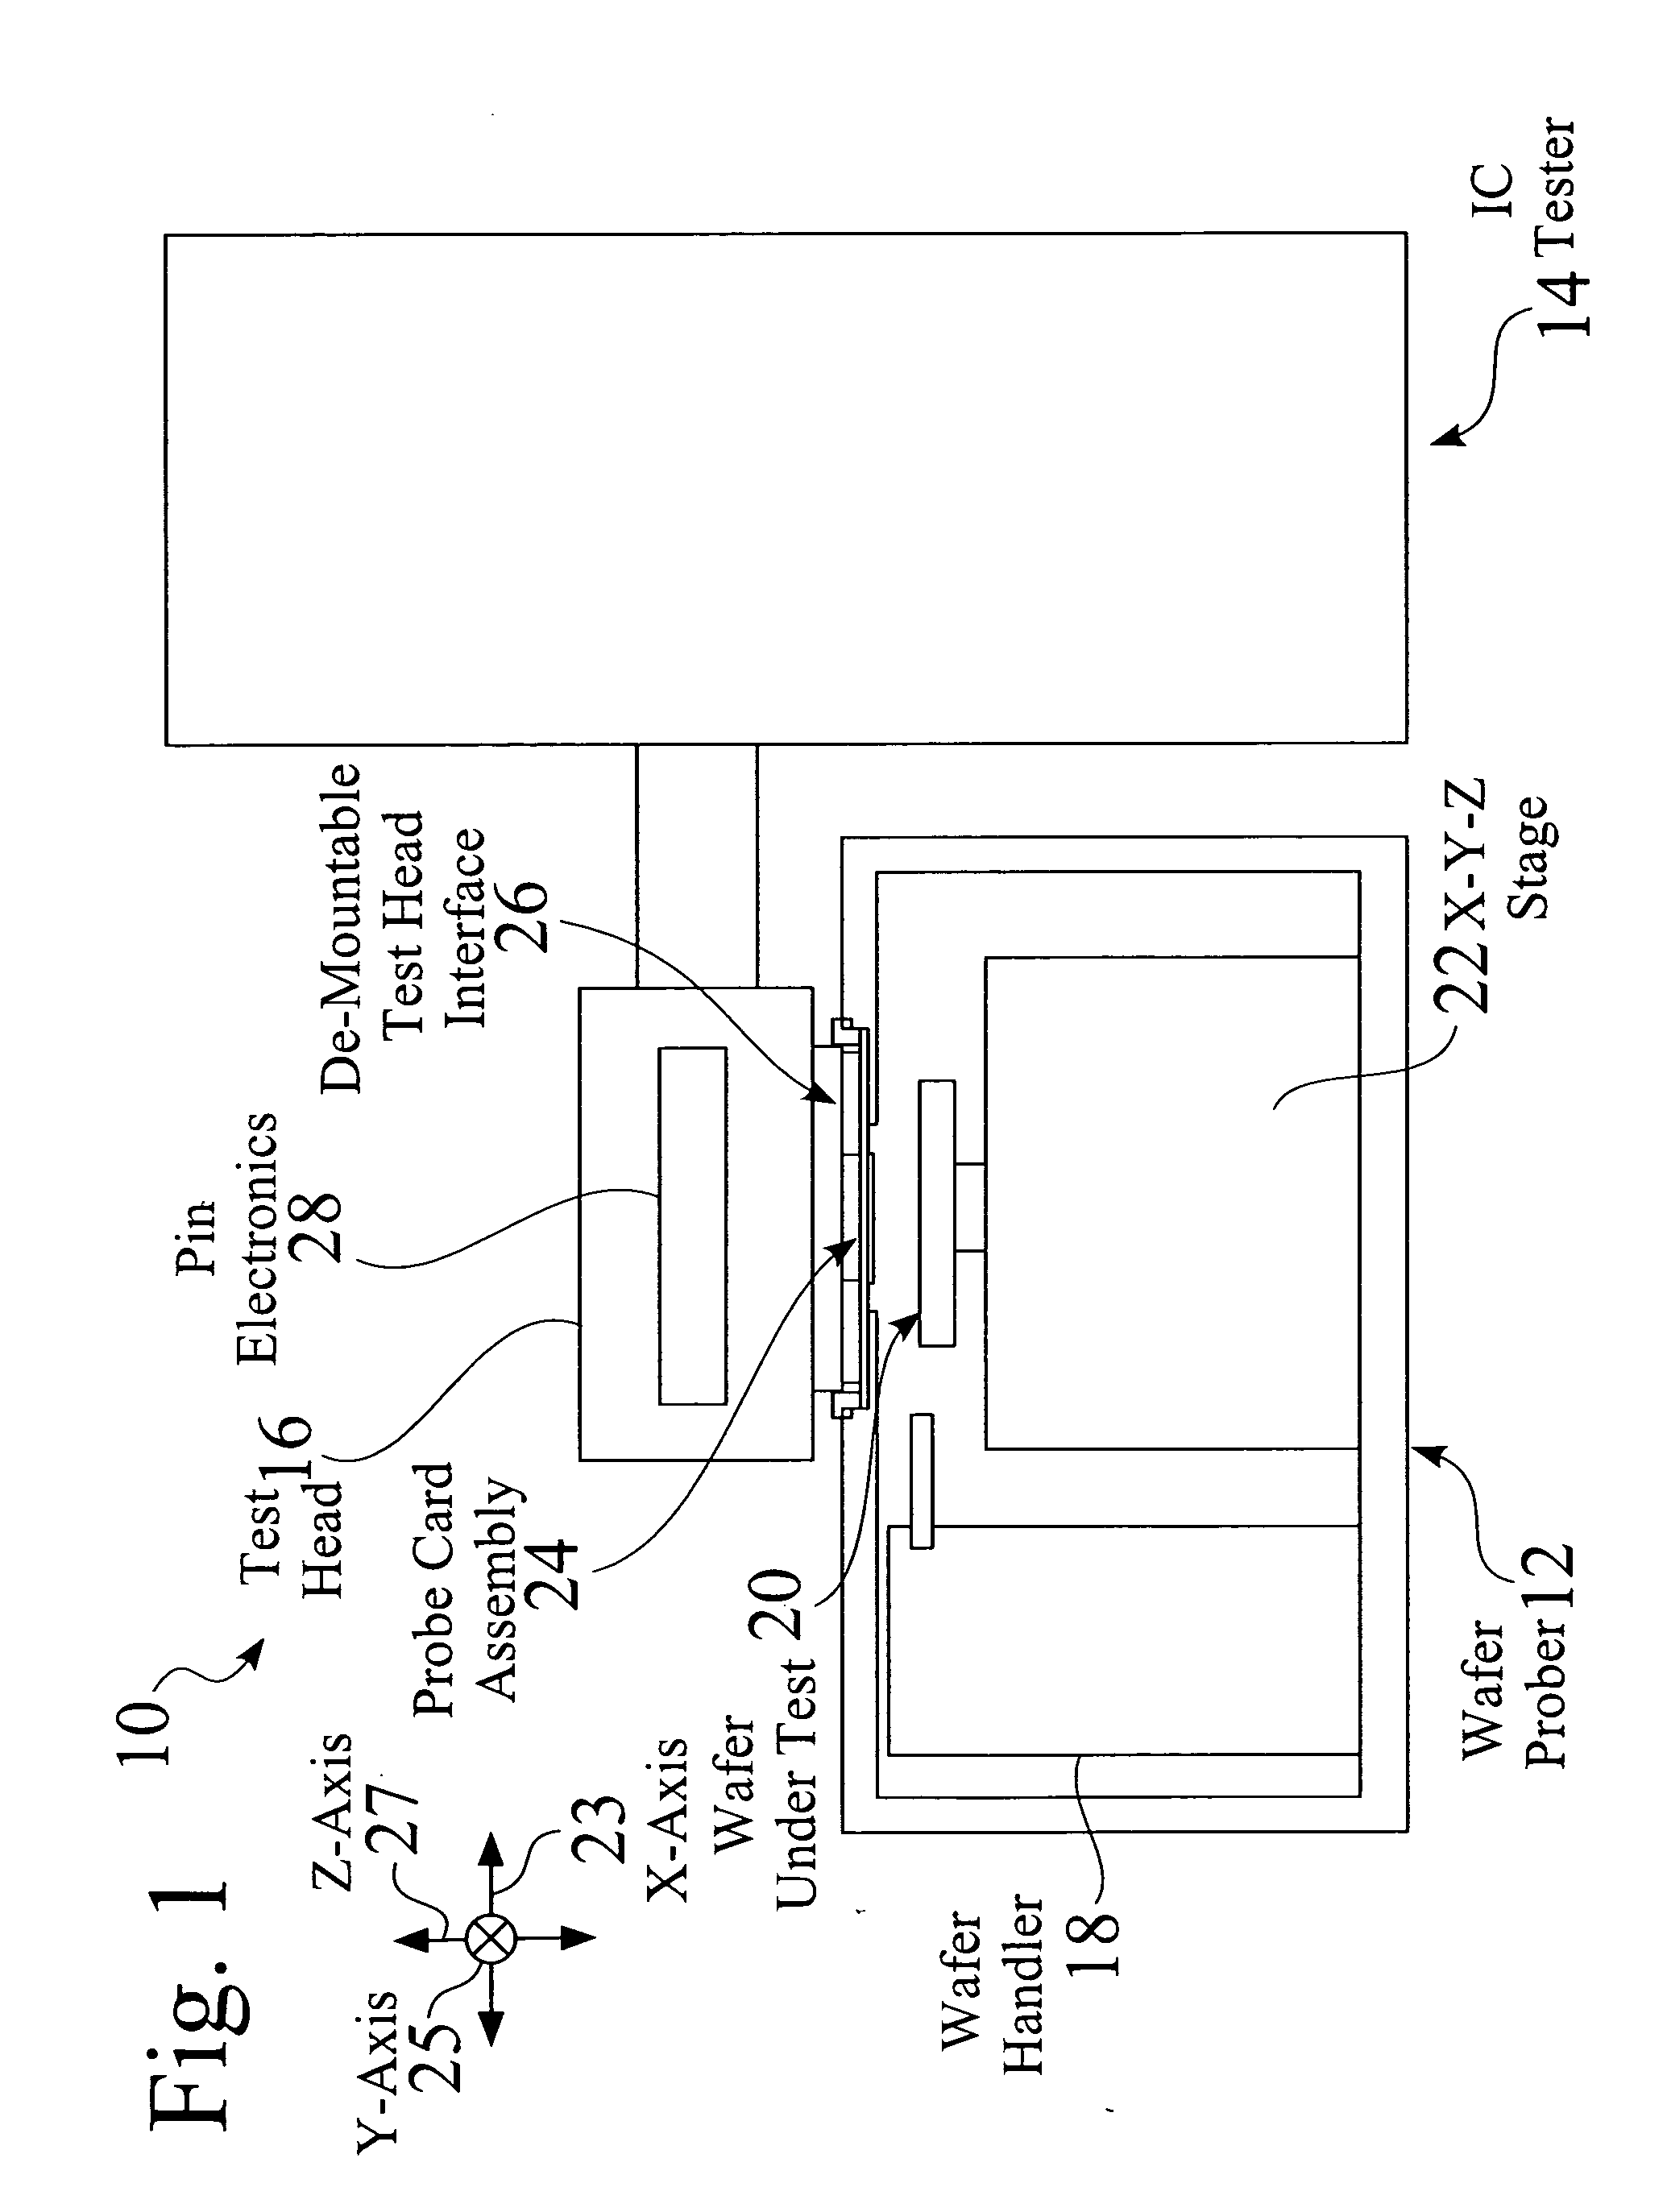 High density interconnect system having rapid fabrication cycle